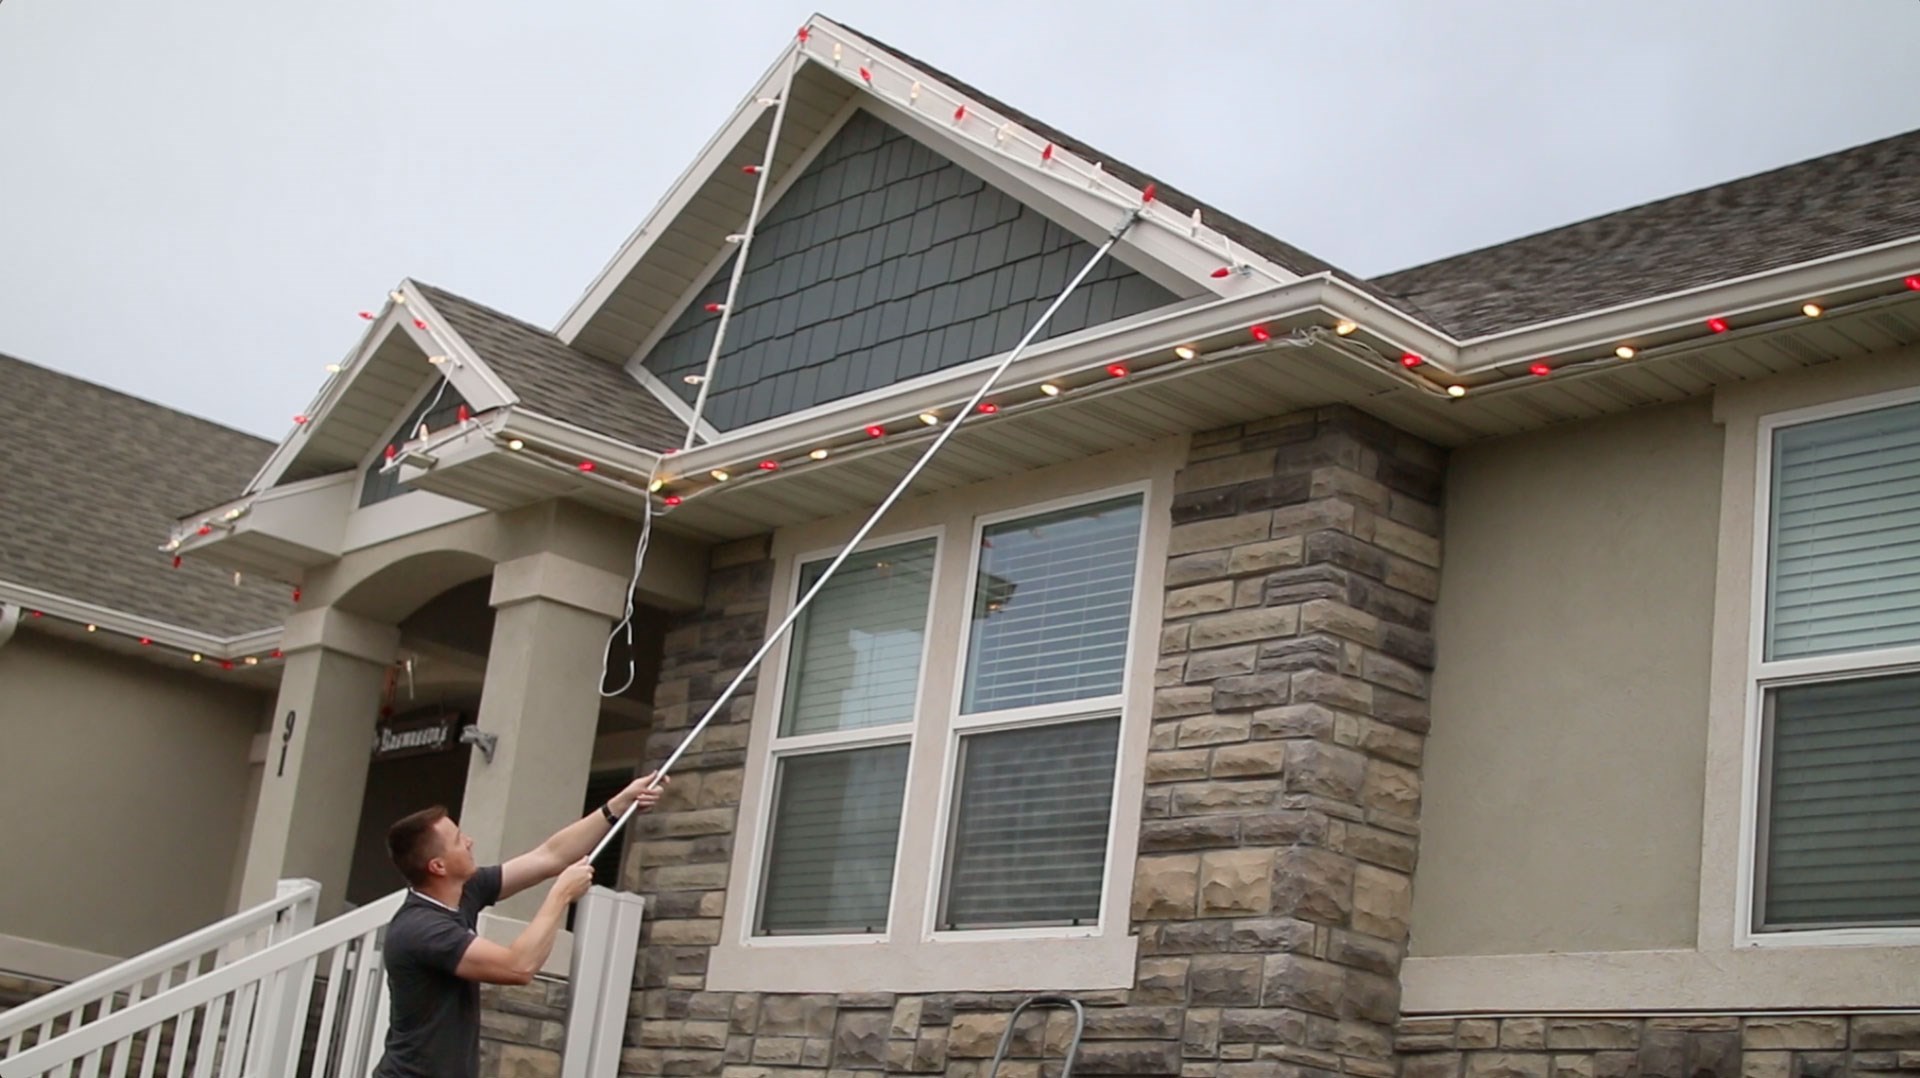 How To Hang Christmas Lights Without Ladder